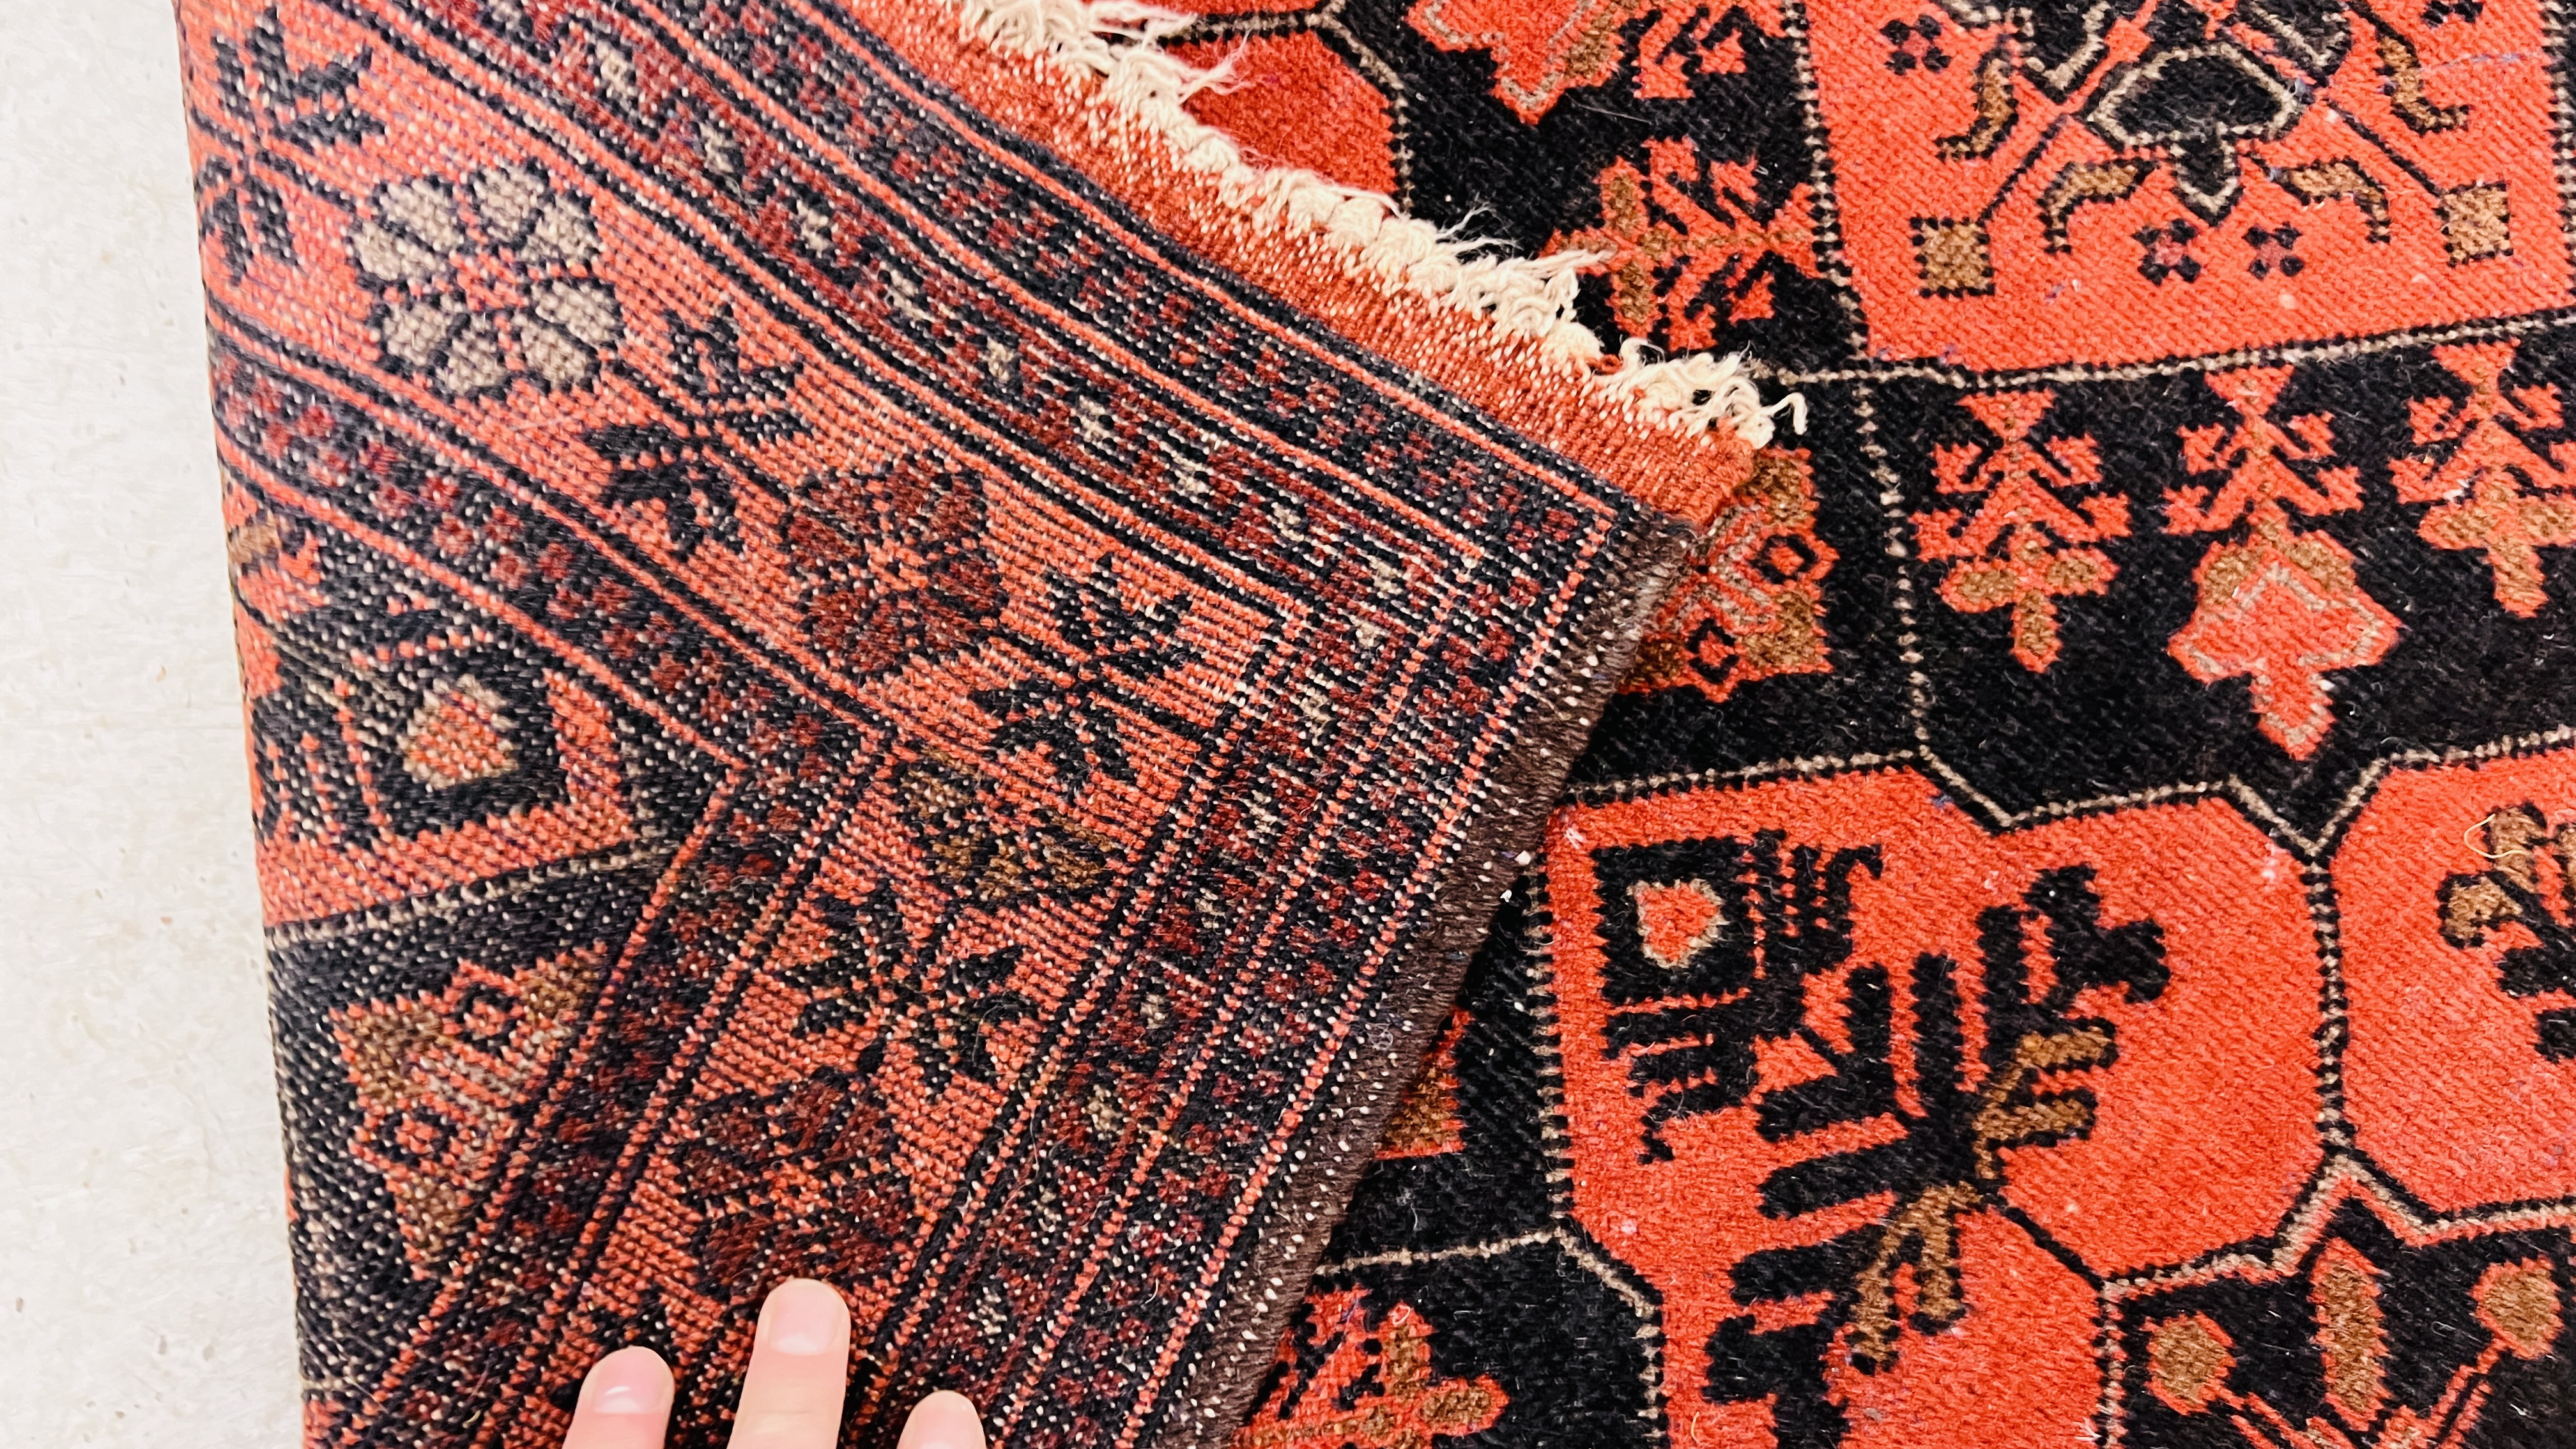 A RED PATTERNED EASTERN RUG. - Image 6 of 6